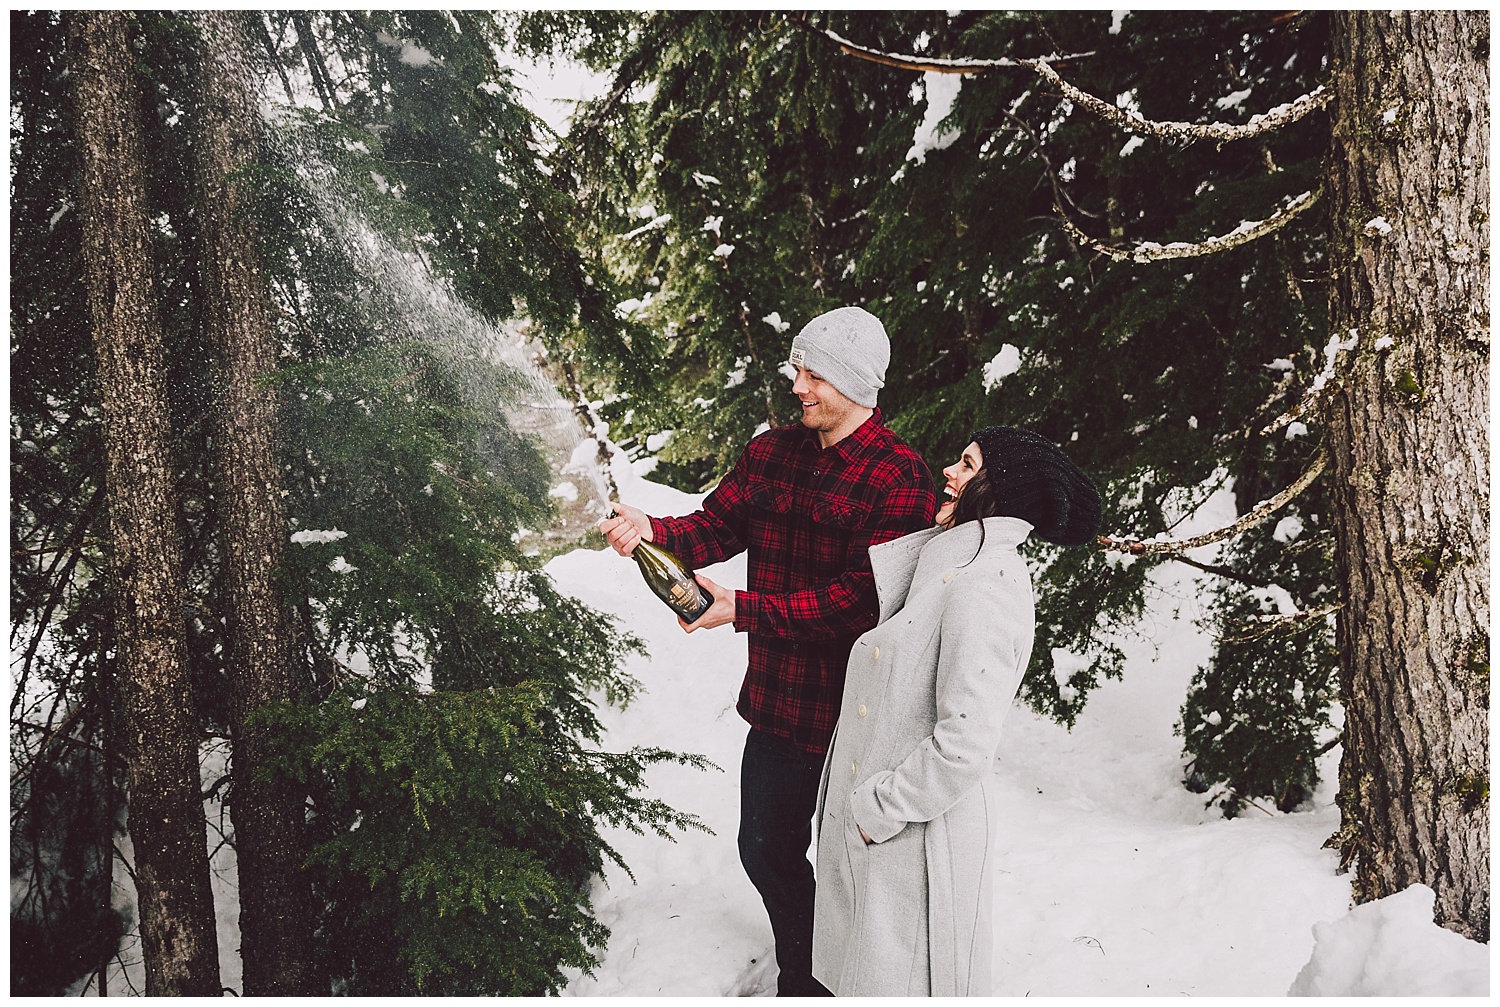 Popping champagne for their snowy engagement photos